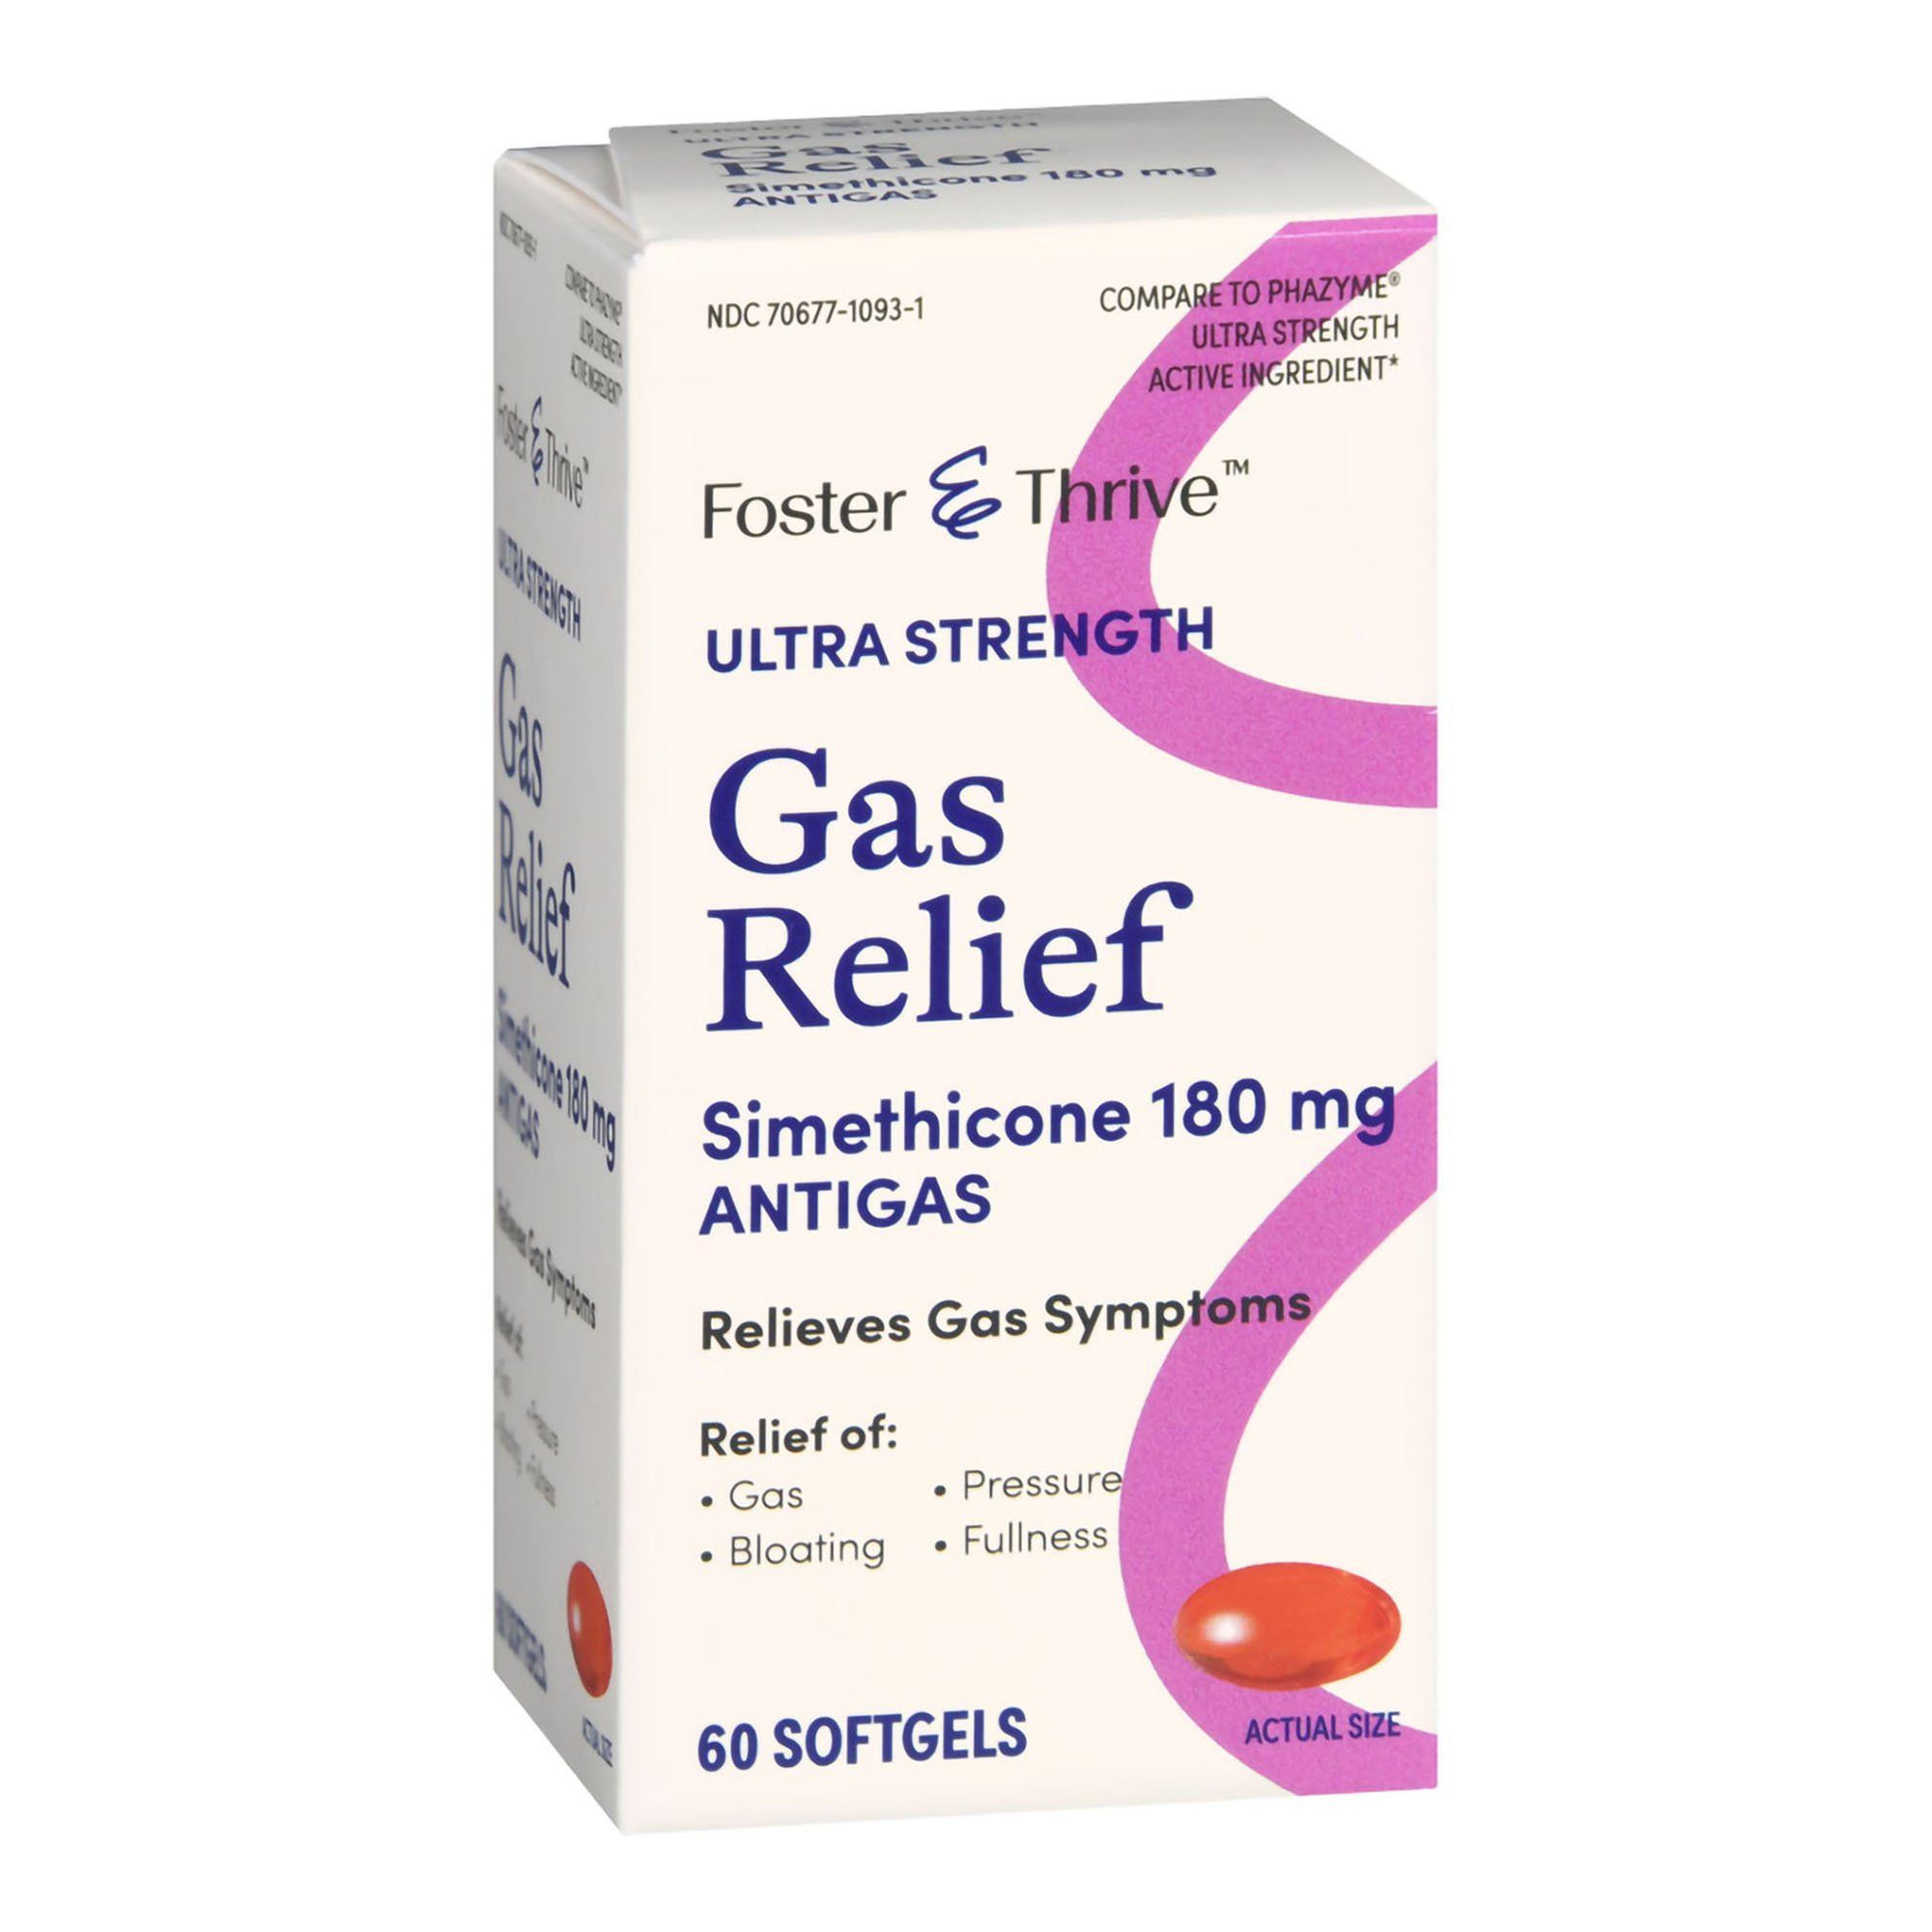 Foster & Thrive Ultra Strength Gas Relief Simethicone SoftGels, 180 mg - 60 ct